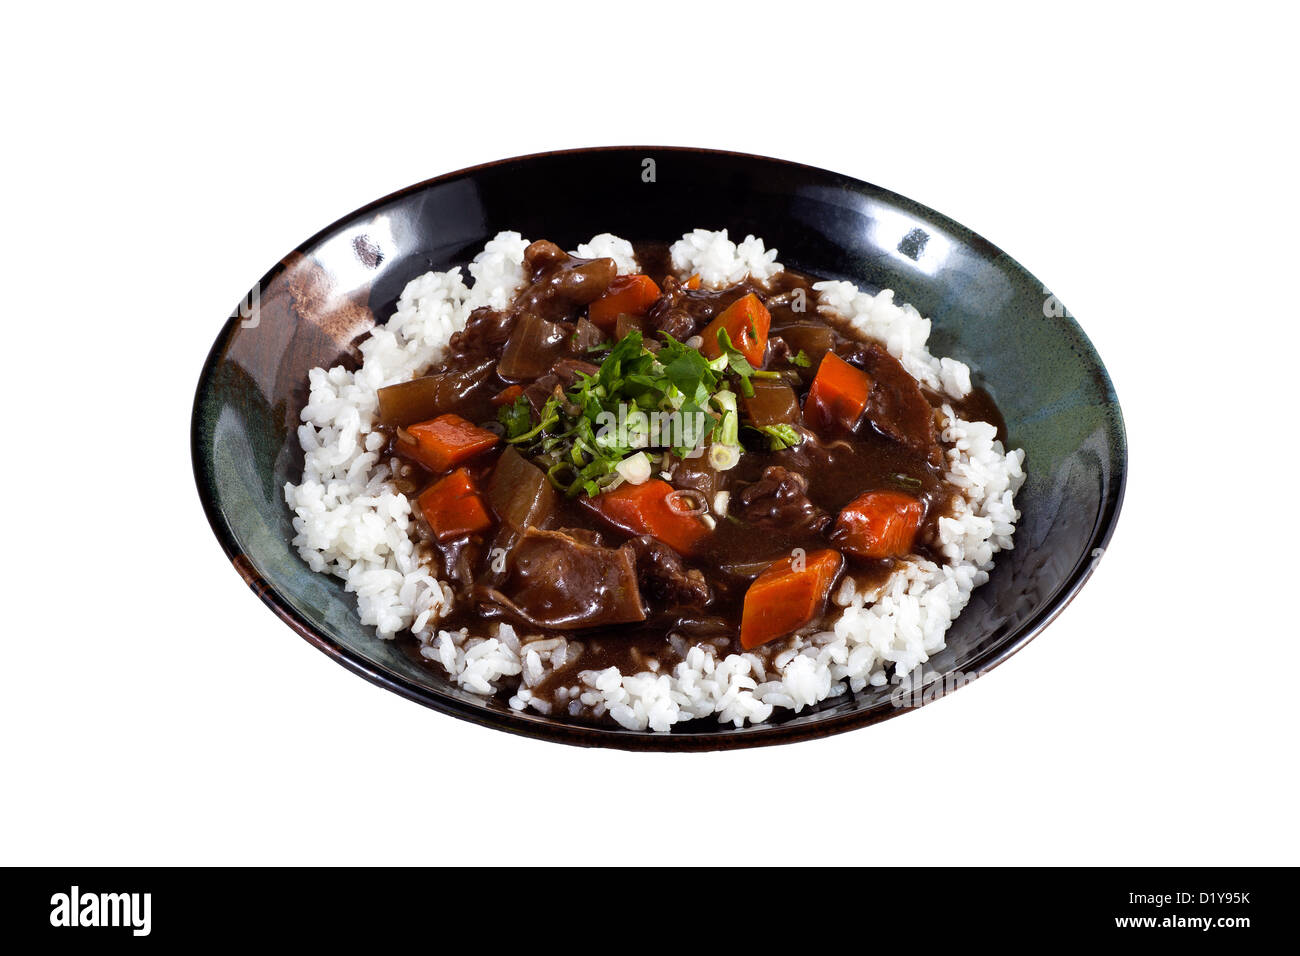 beef rice for adv or others purpose use Stock Photo